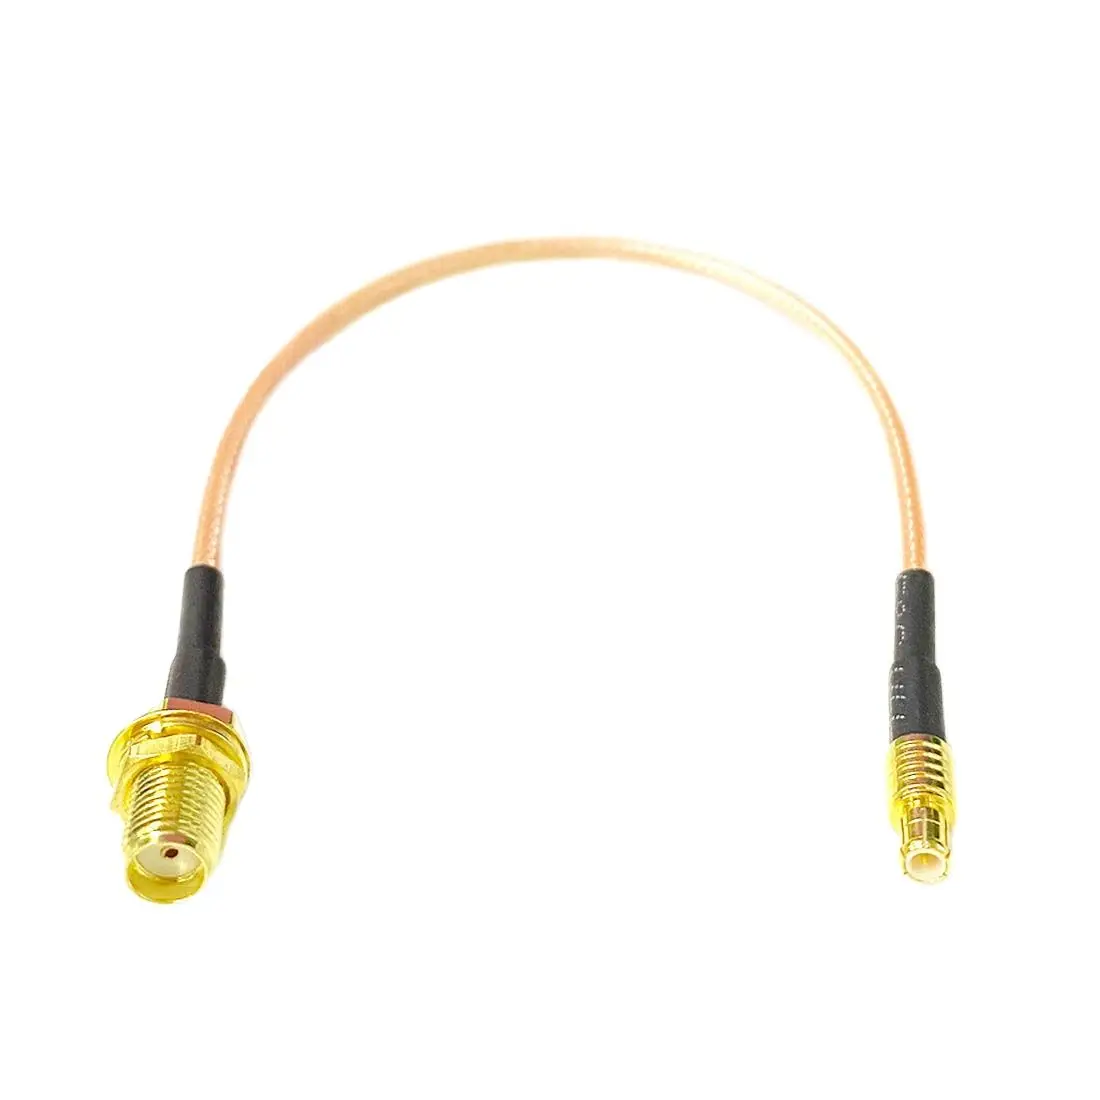 SMA Female Bulkhead to MCX Male Straight RF Cable Adapter RG316 15cm 6inch NEW Wholesale for WIFI Wireless Router